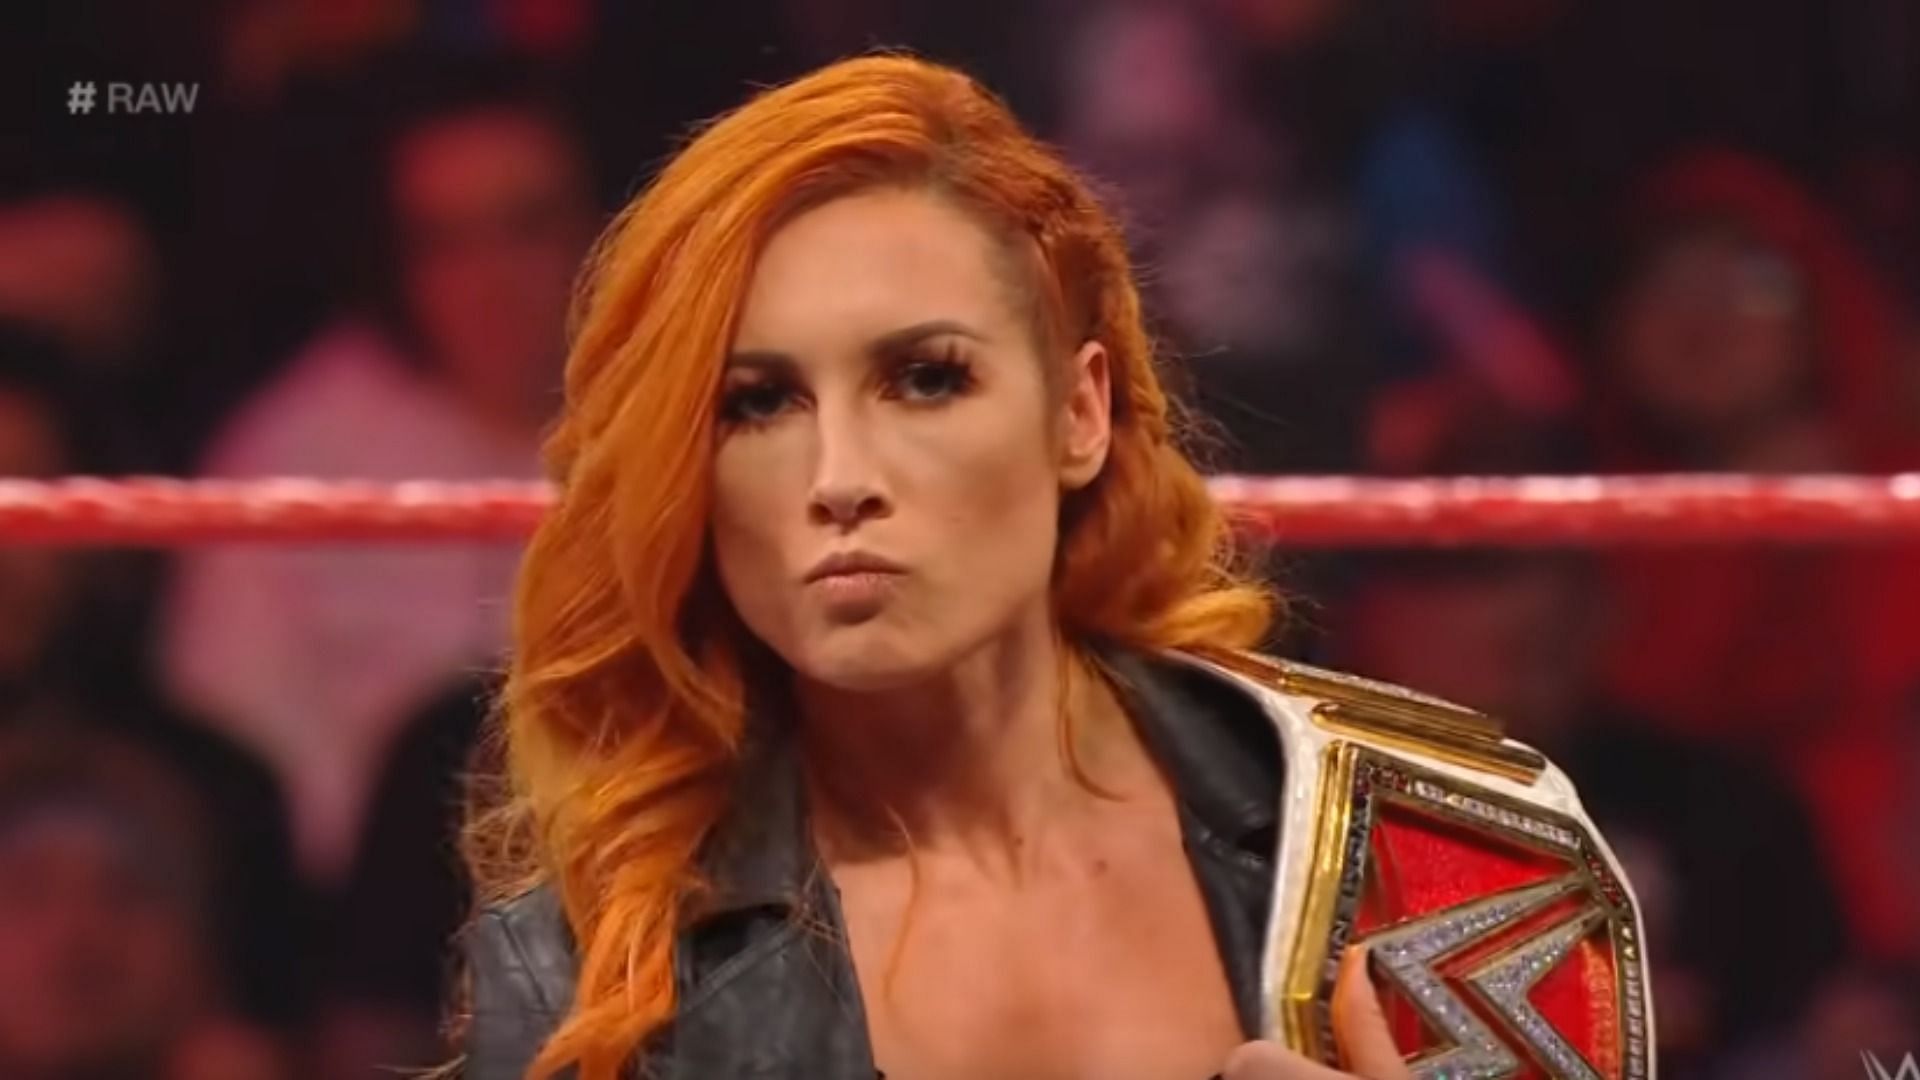 The Man is not happy after losing her title at WrestleMania 38